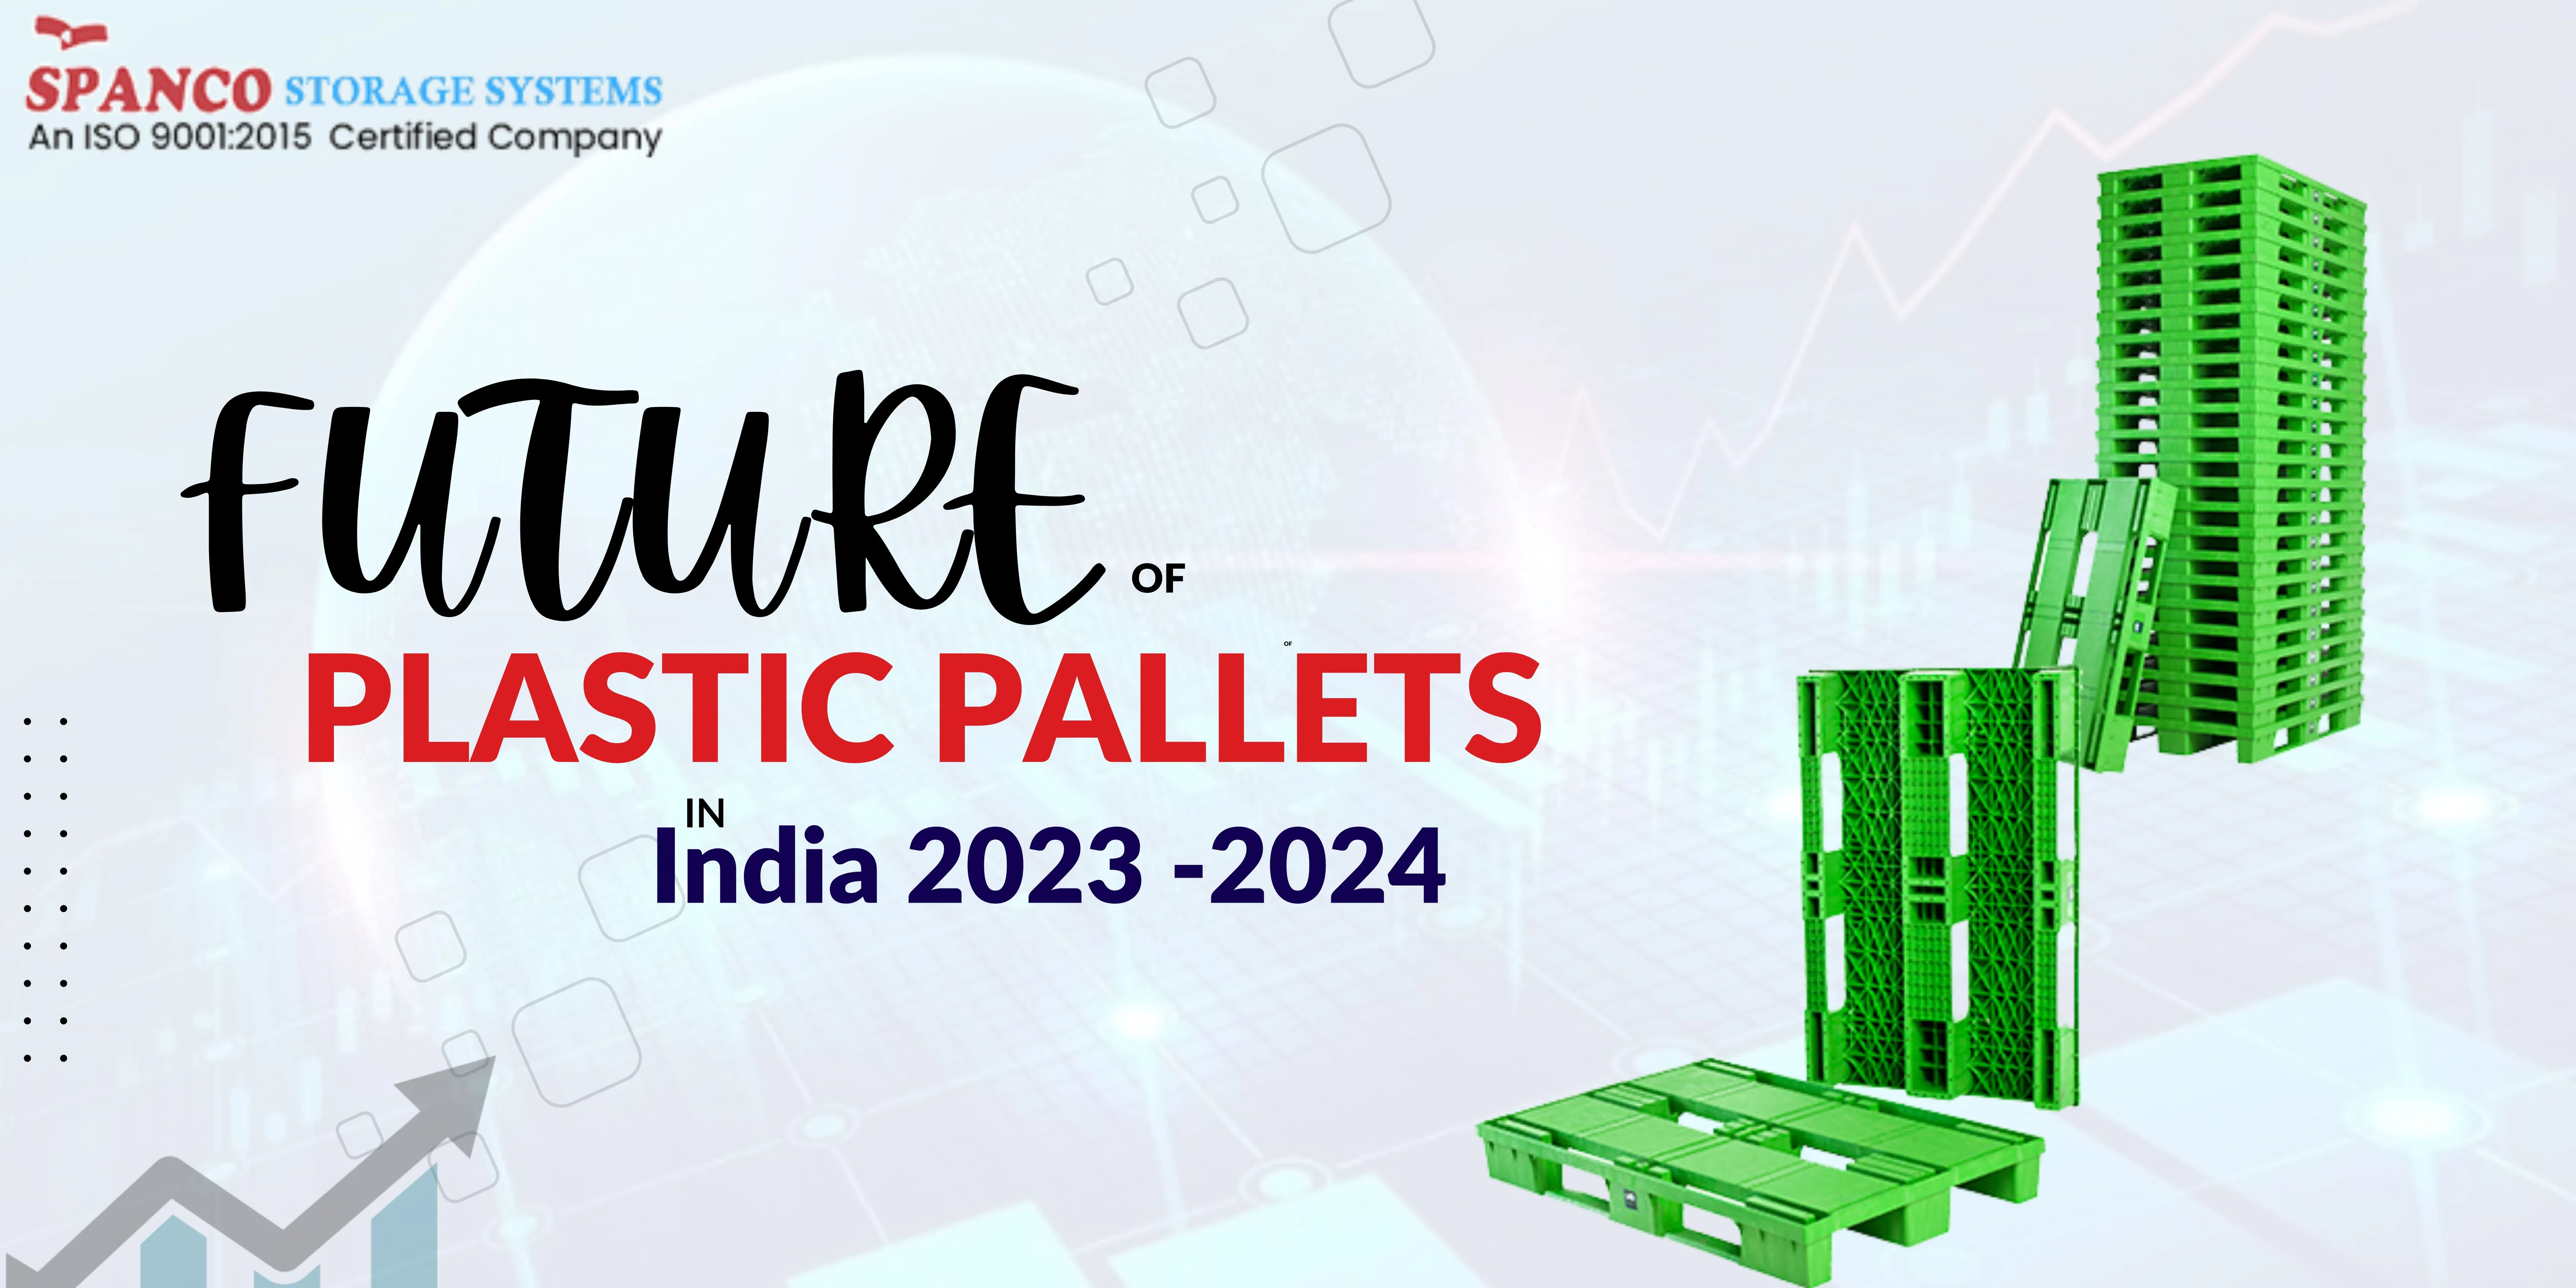 The Future of Plastic Pallets in India 2023 -2024